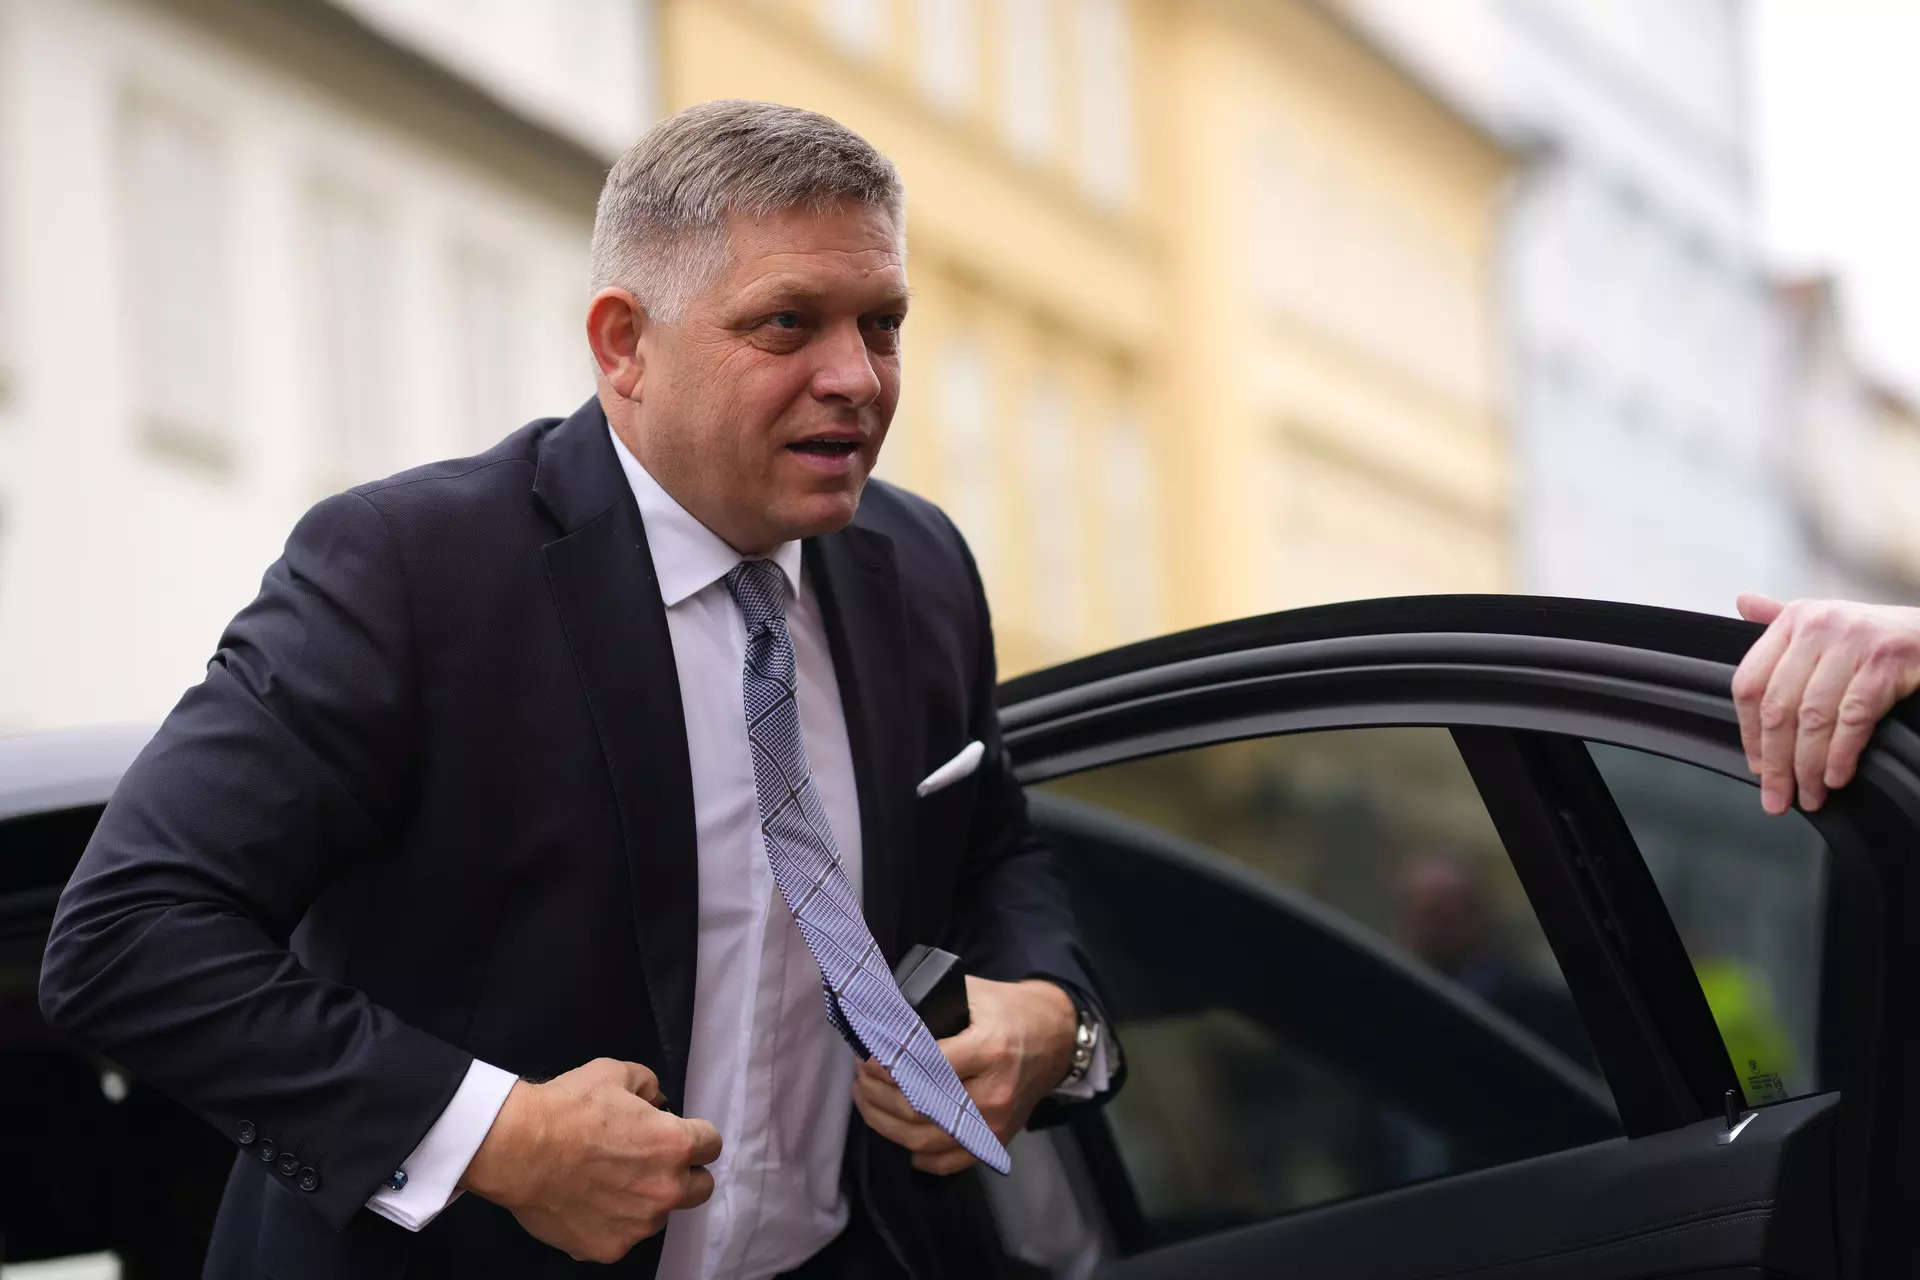 Slovakia's prime minister Robert Fico wounded in shooting 